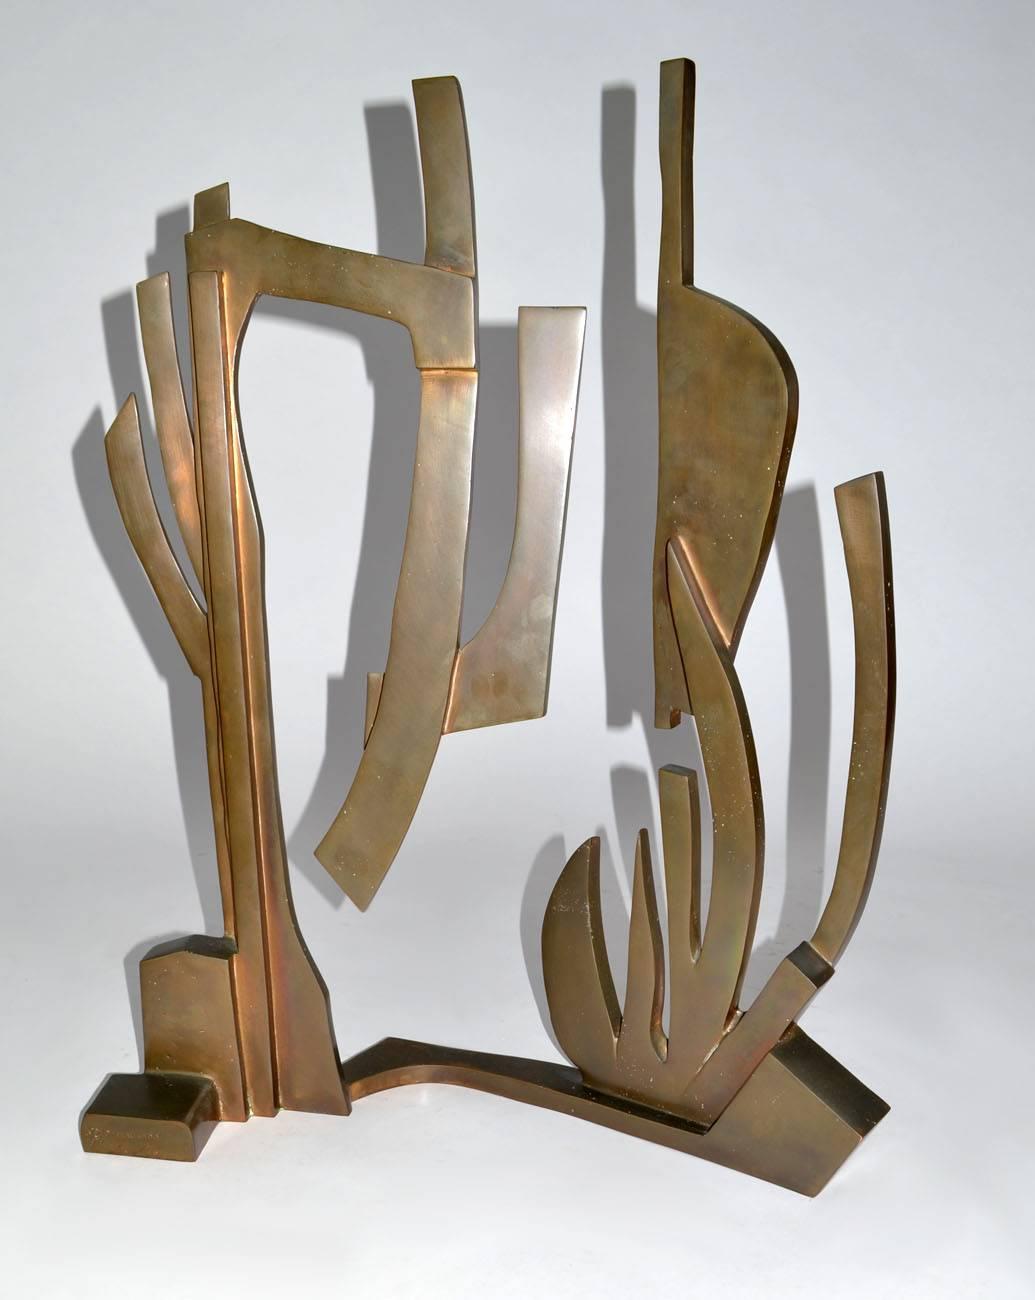 Large modern abstract bronze sculpture by Oded Halahmy, New York, 1977. Oded Halahmy was born in Iraq, moved with his family to Israel in the 1950s, was educated at St. Martin's School of Art in London. Sculptures are in the collection of the